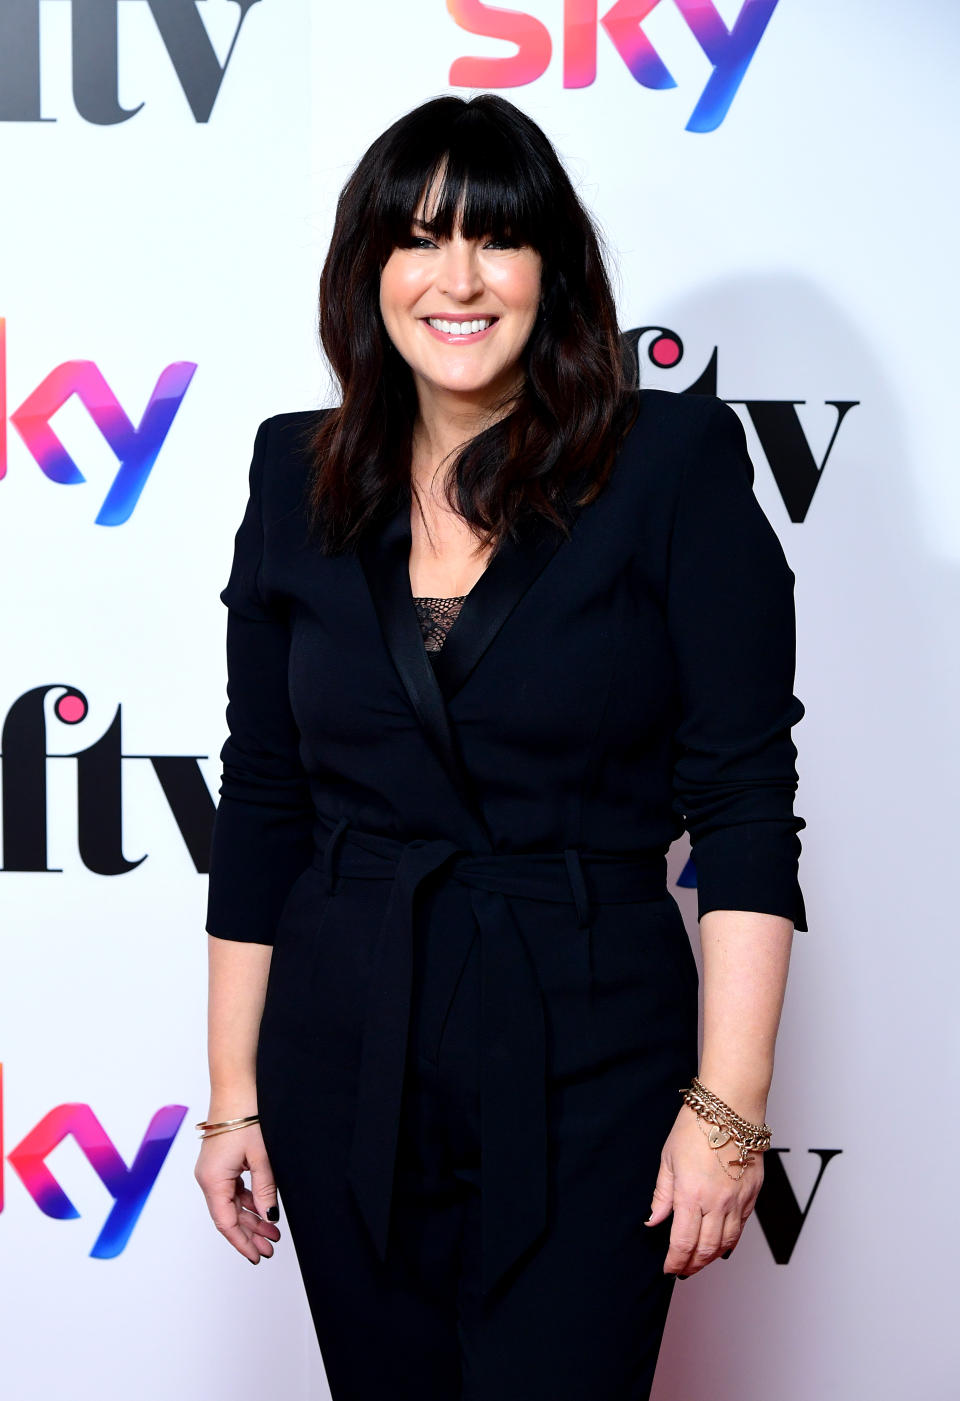 Anna Richardson attending the Women in Film and TV Awards 2019 at the Hilton, Park Lane, London. (Photo by Ian West/PA Images via Getty Images)